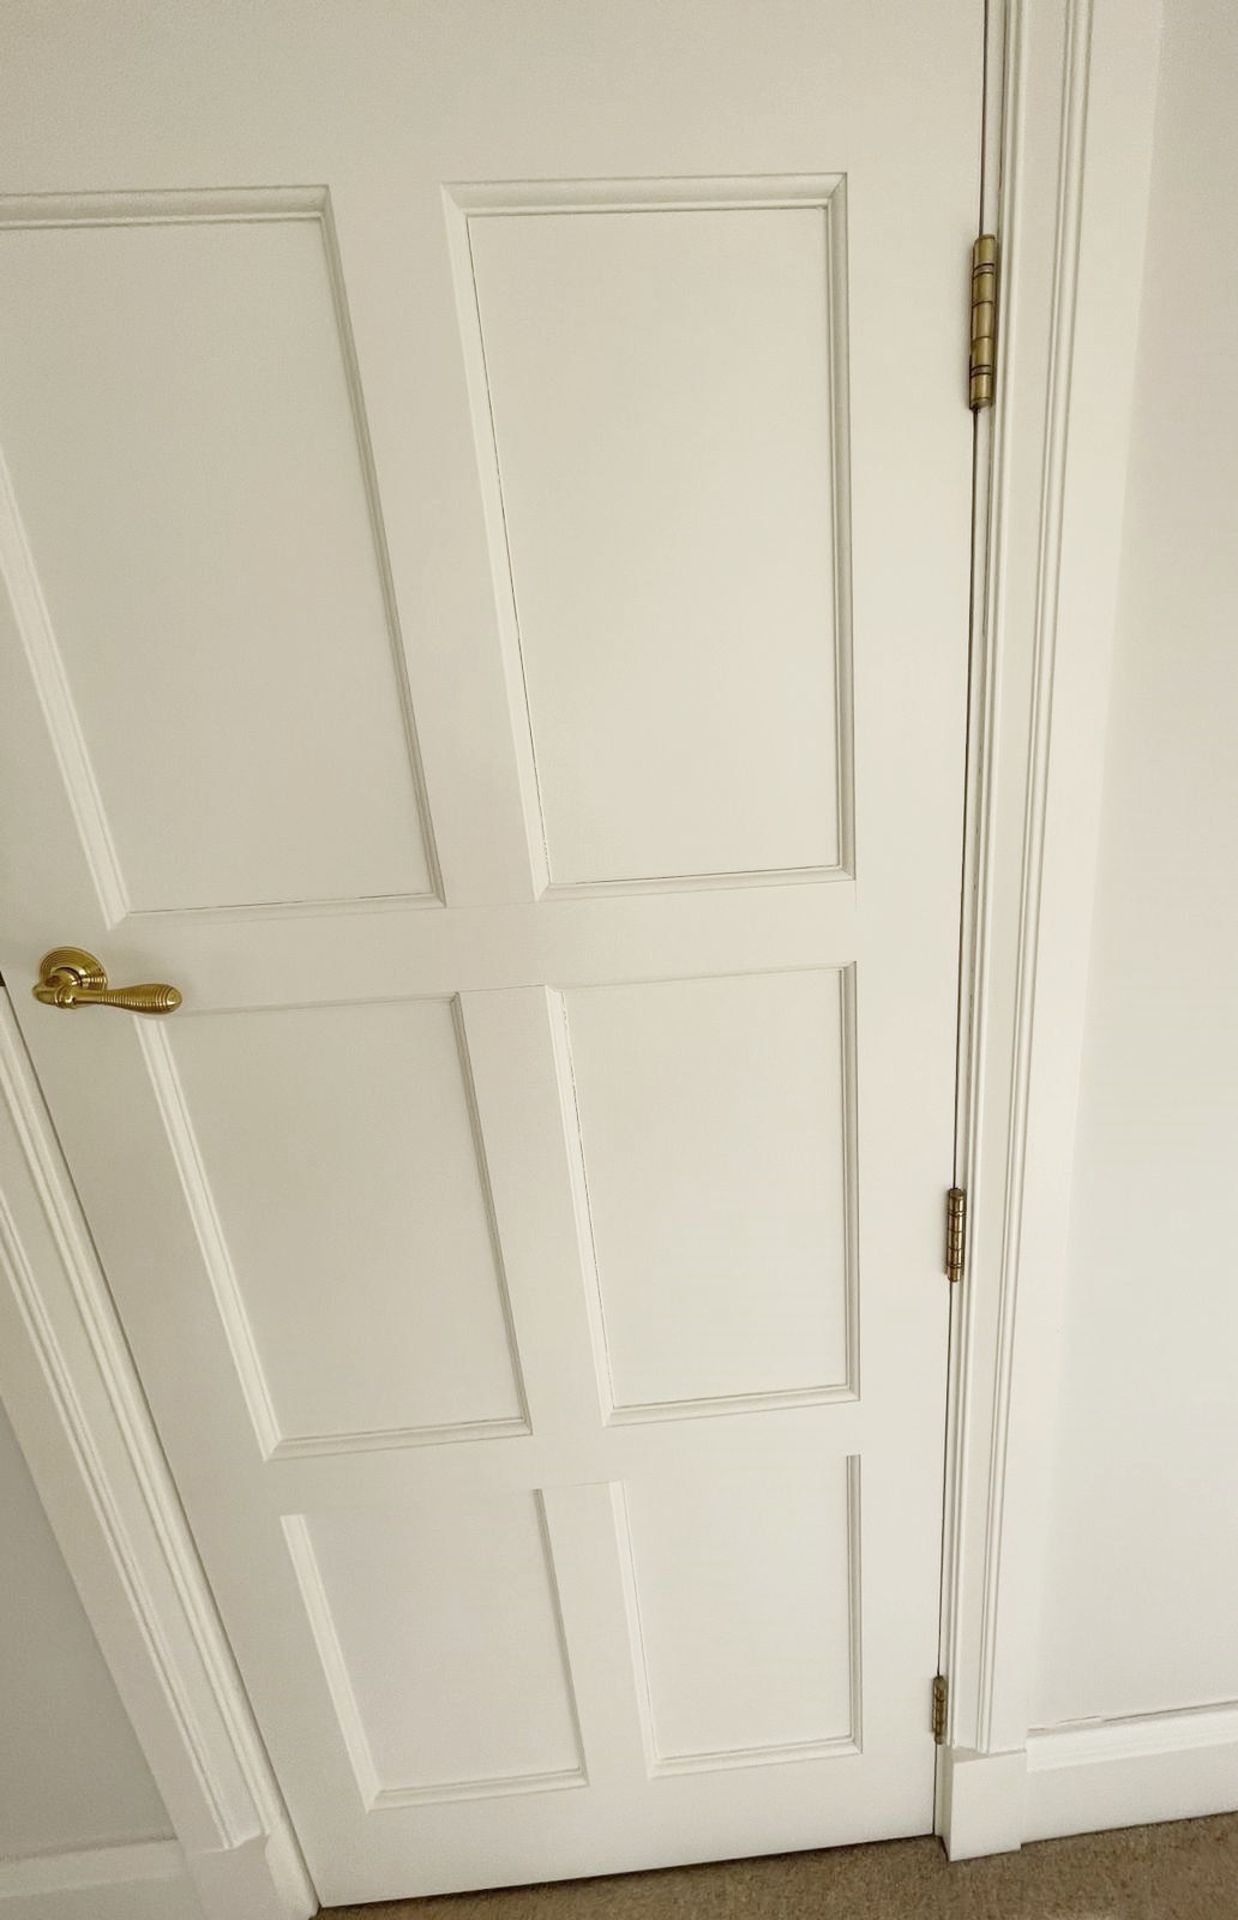 1 x Solid Wood Lockable Painted  Internal Door in White - Includes Handles and Hinges - Image 6 of 10